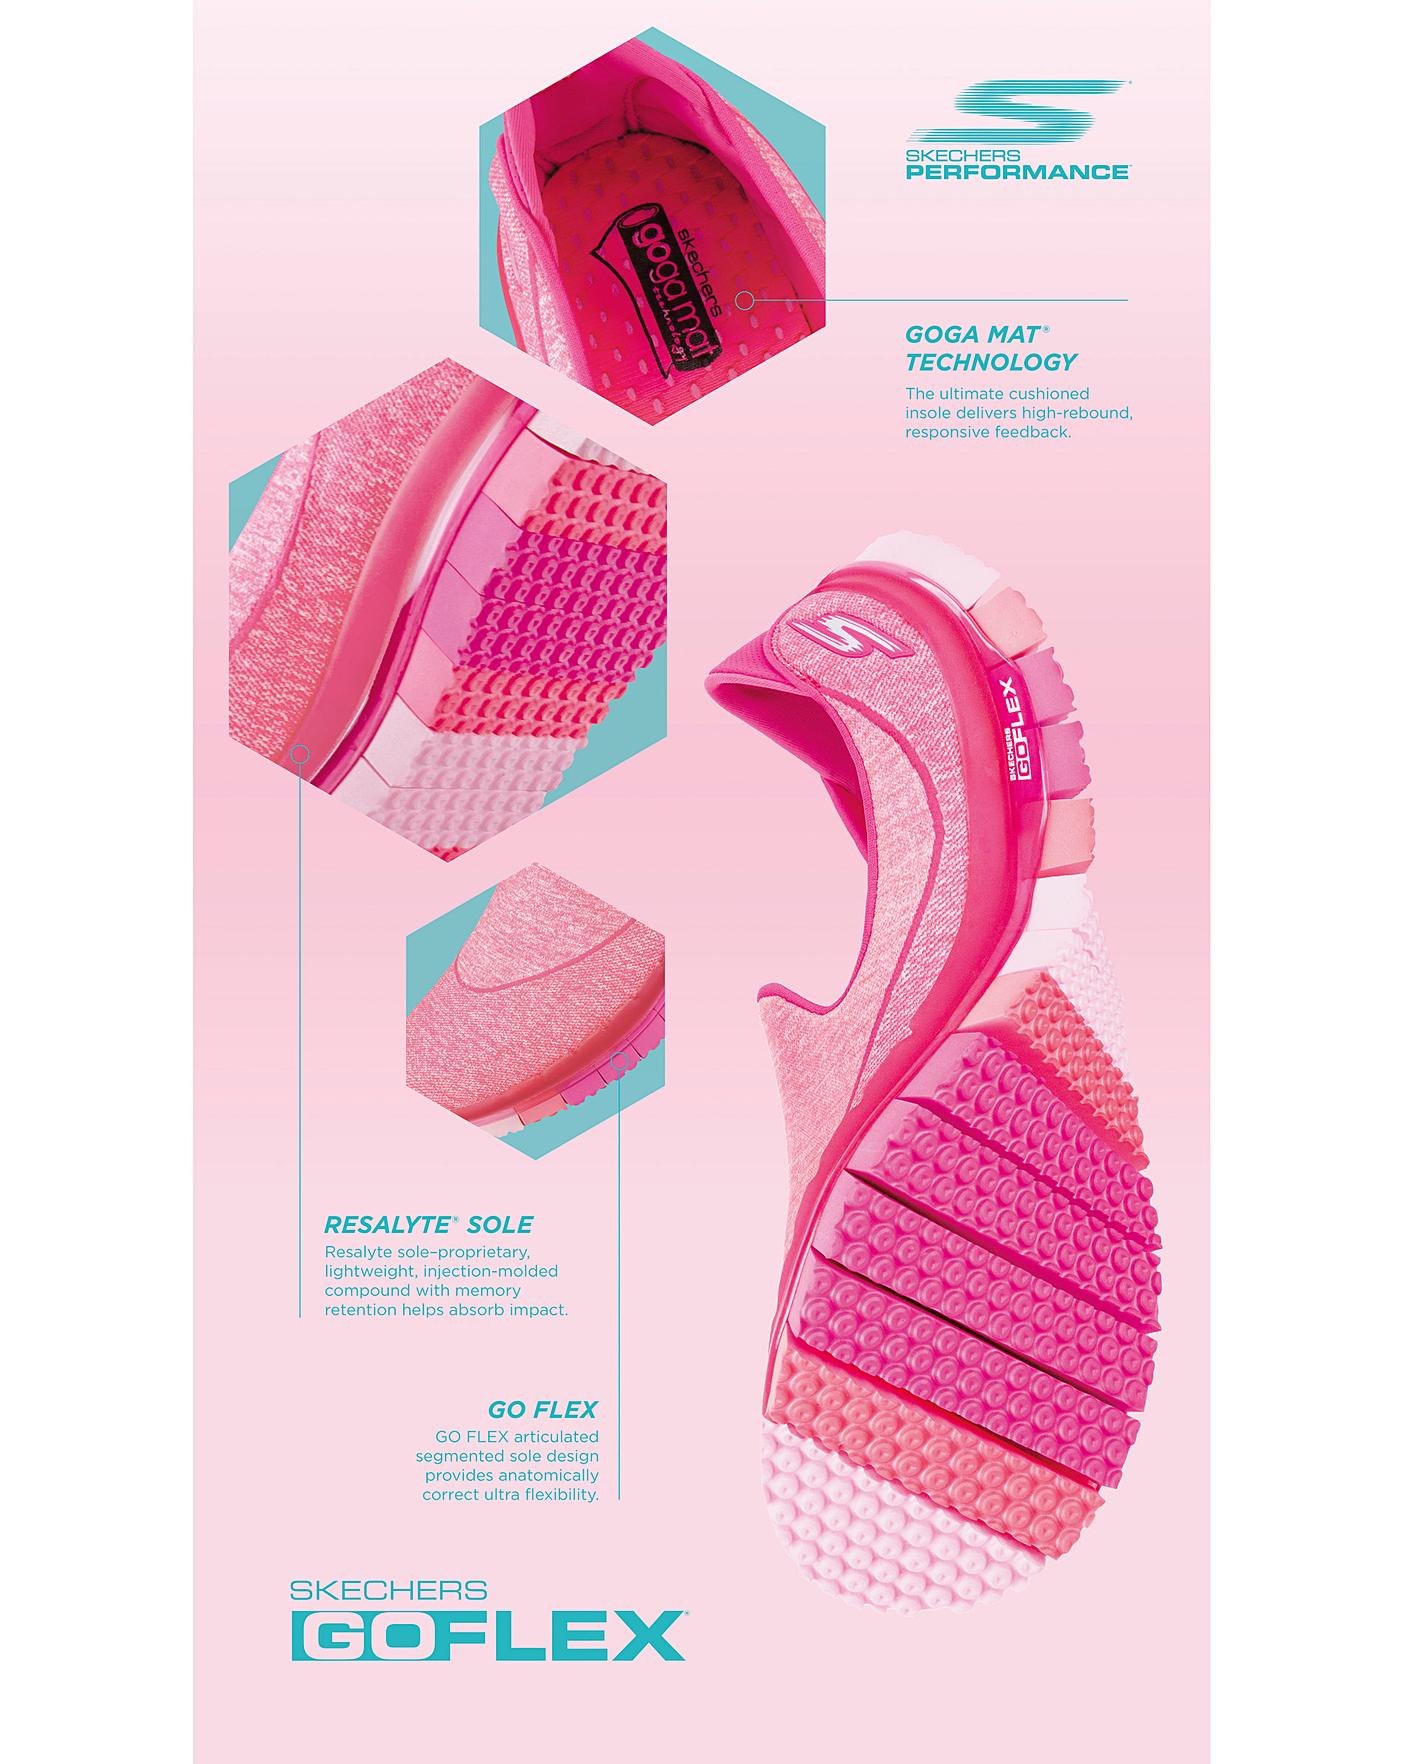 skechers with goga mat insoles